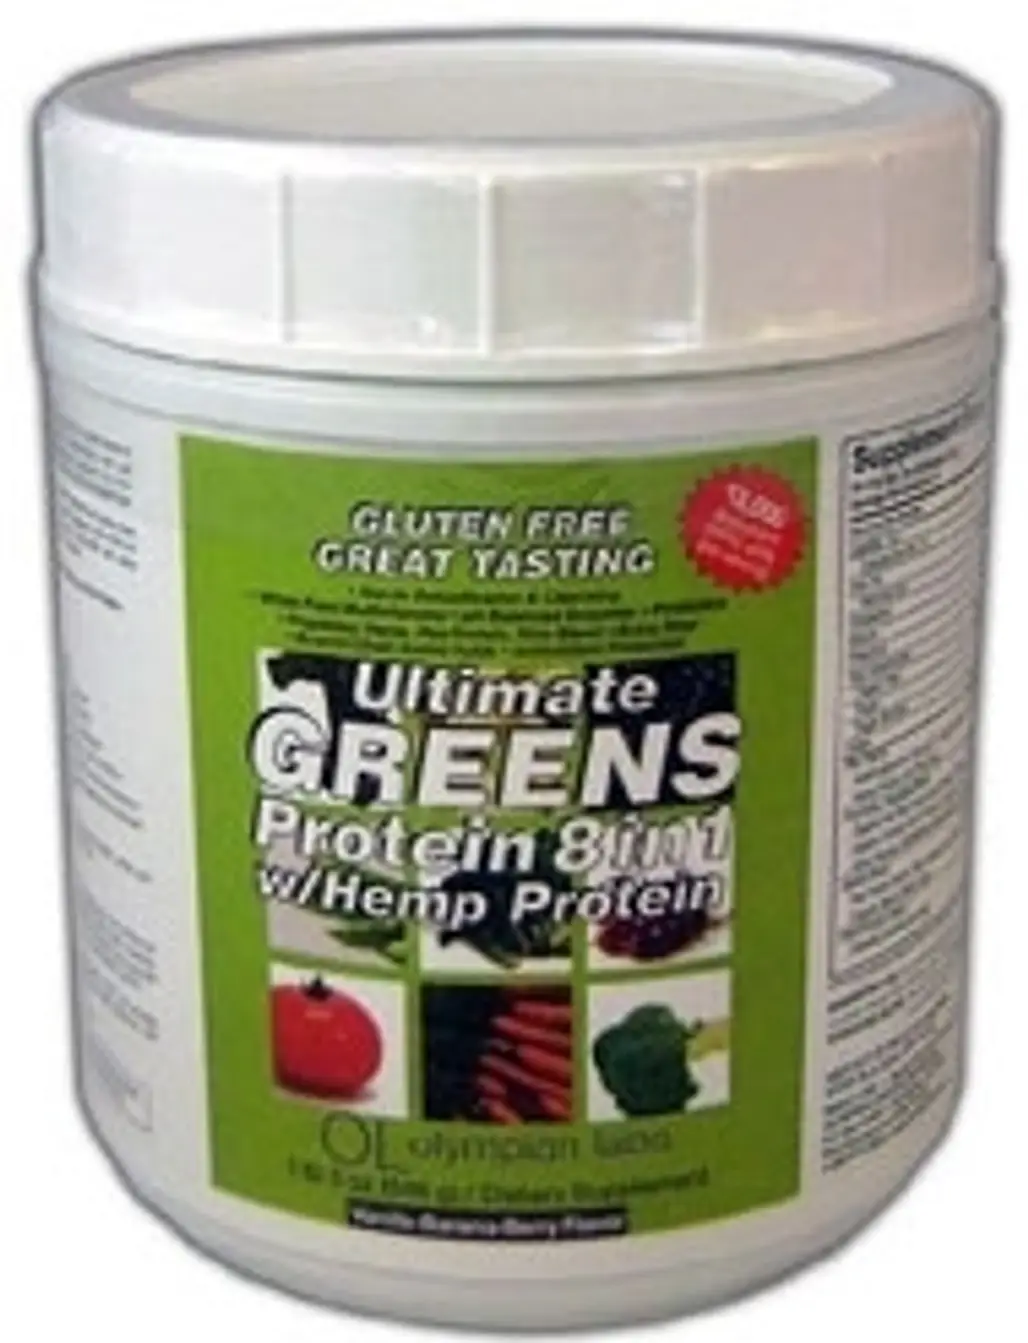 Olympian Labs Inc., Ultimate Greens Protein